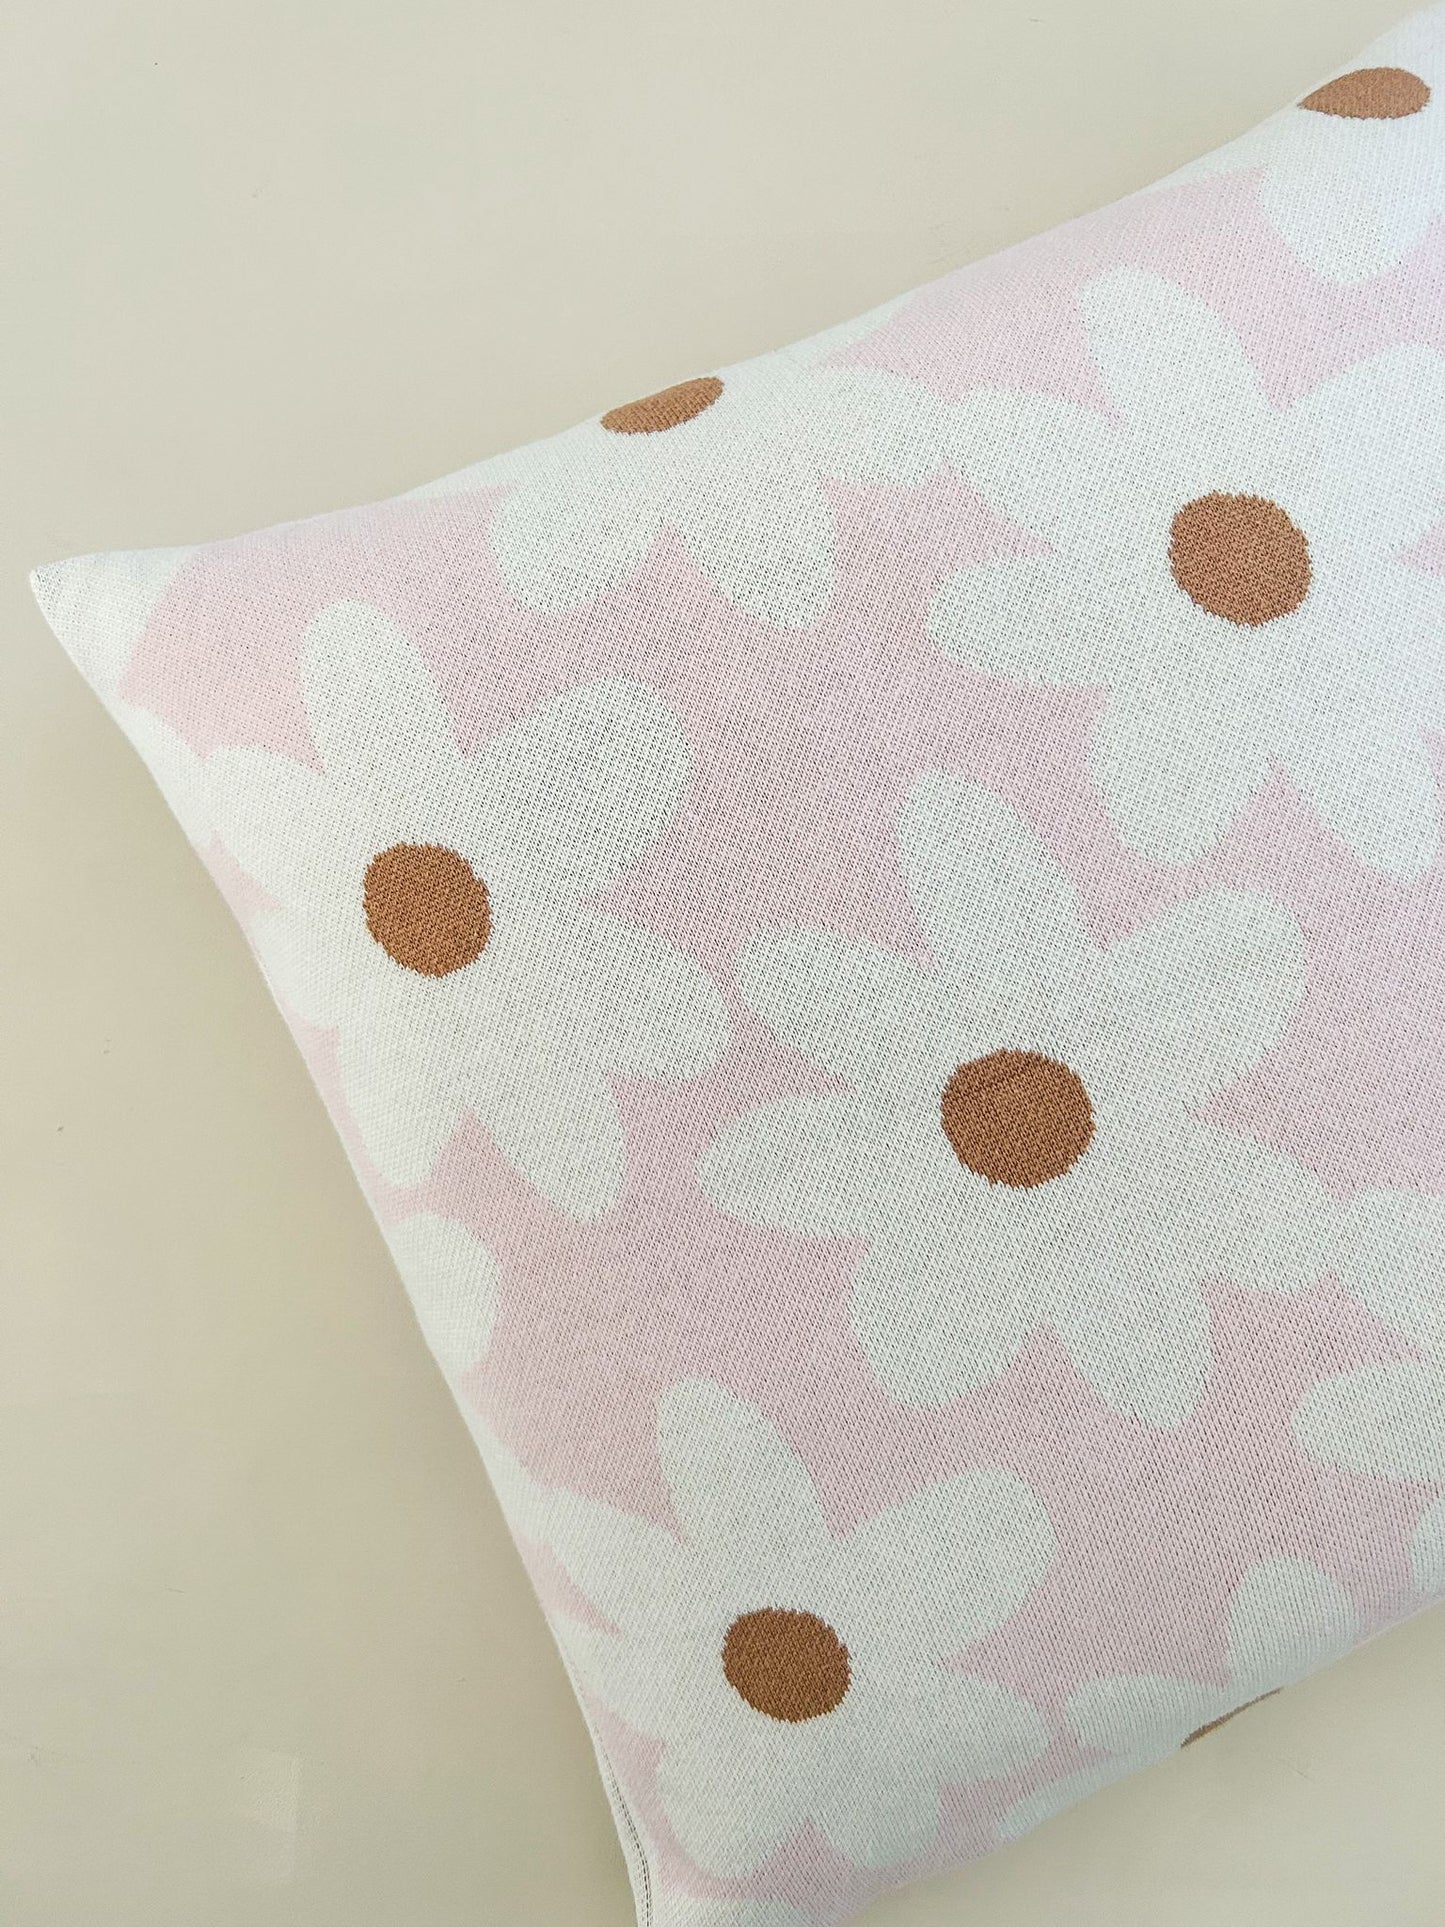 100% Organic Cotton Jacquard Knit Cushion Cover - Floral - 20% OFF